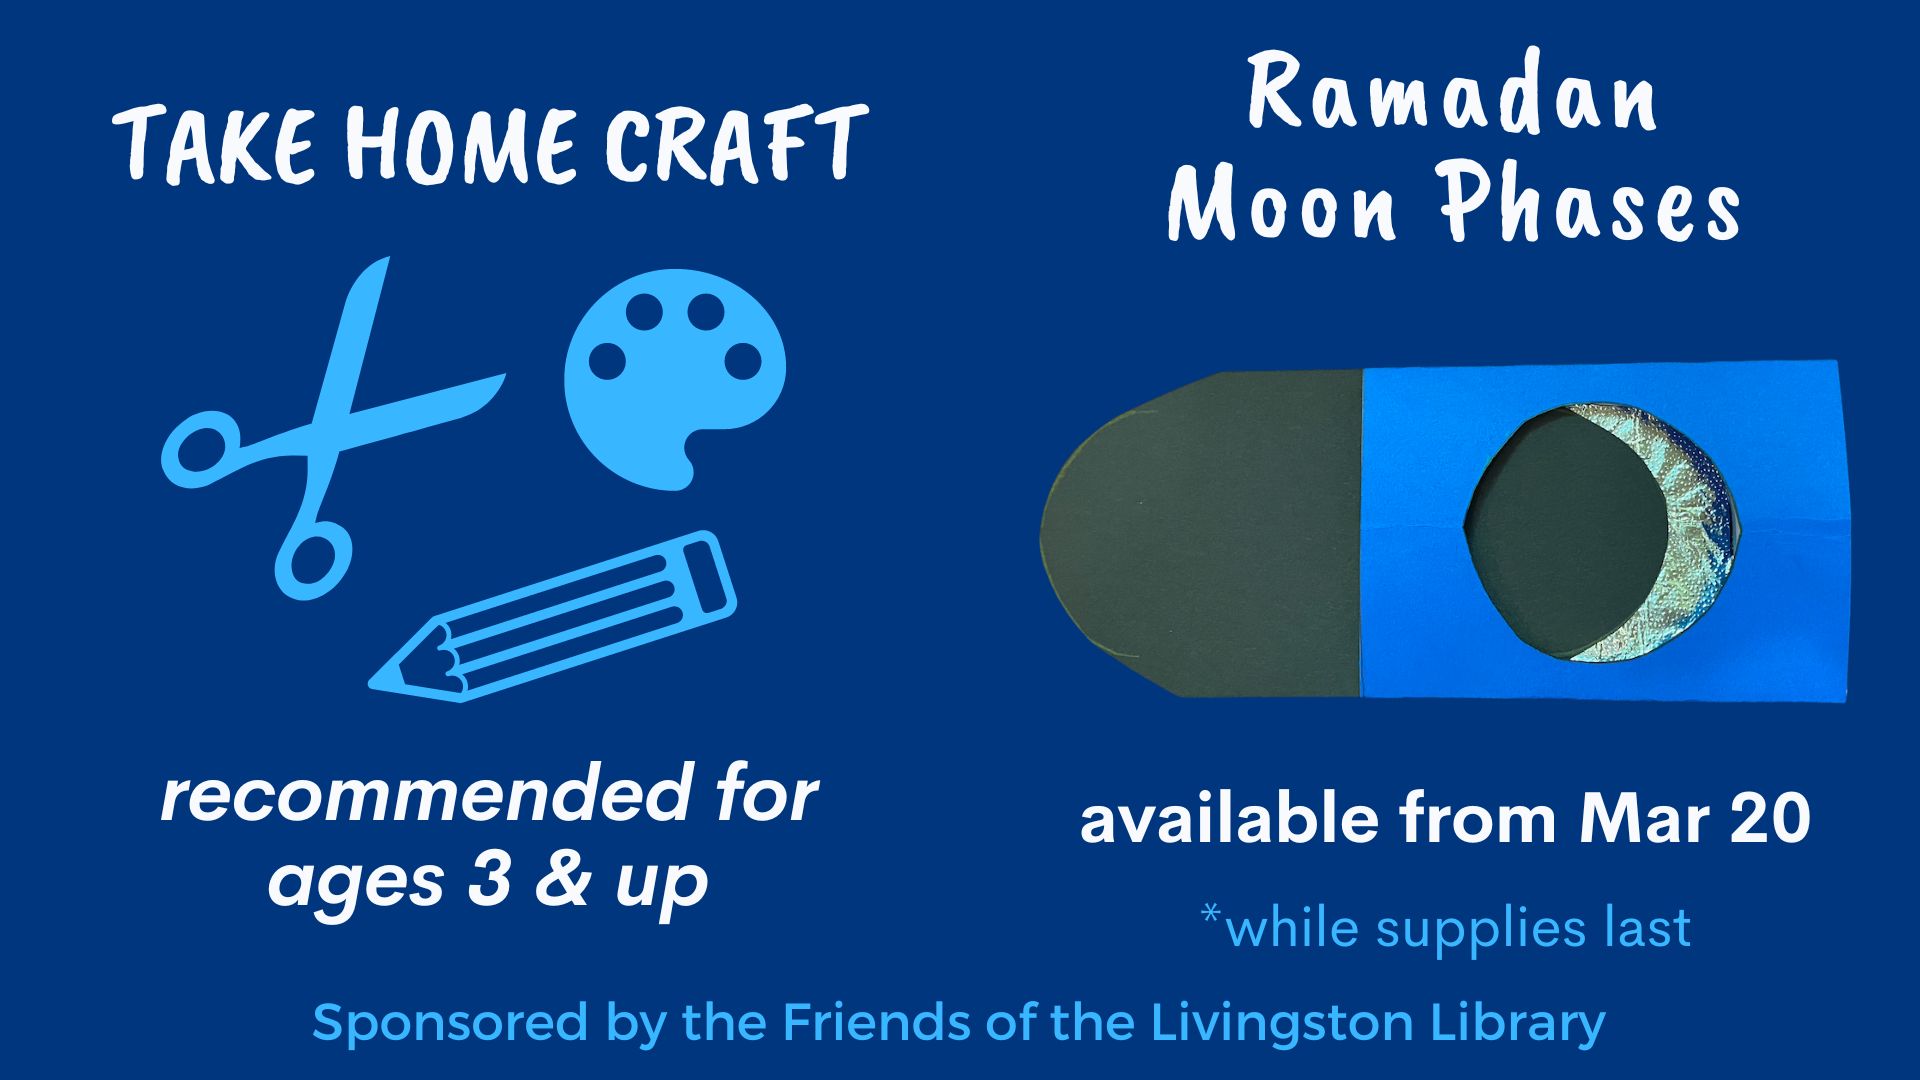 dark blue background with light blue text reading take home craft ramadan moon phases with a picture of a sliding paper moon phases craft